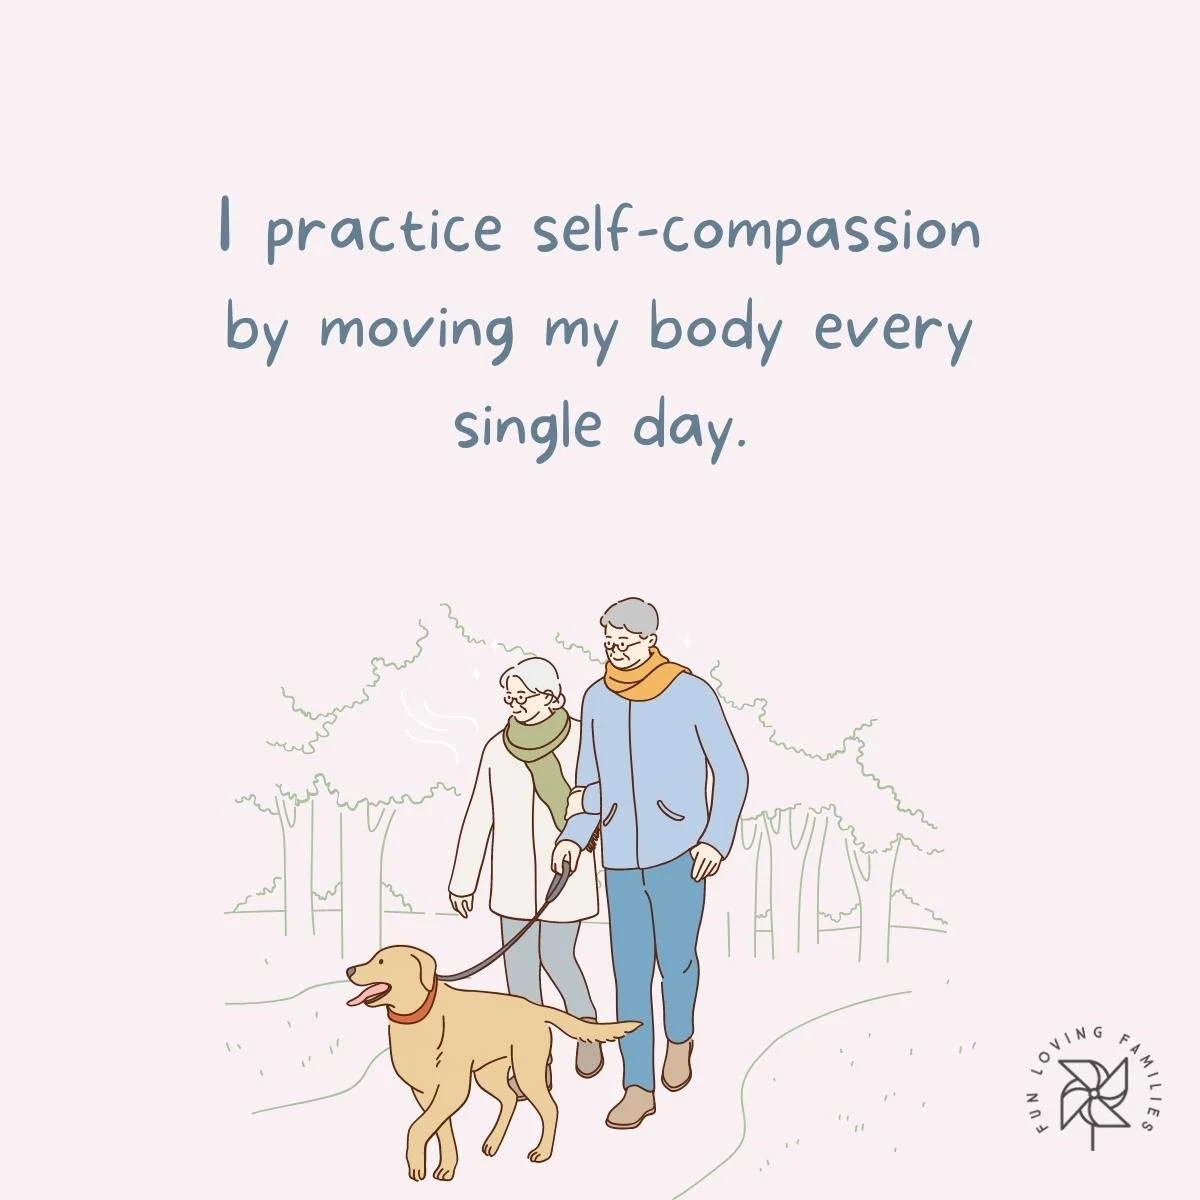 I practice self-compassion by moving my body every single day affirmation